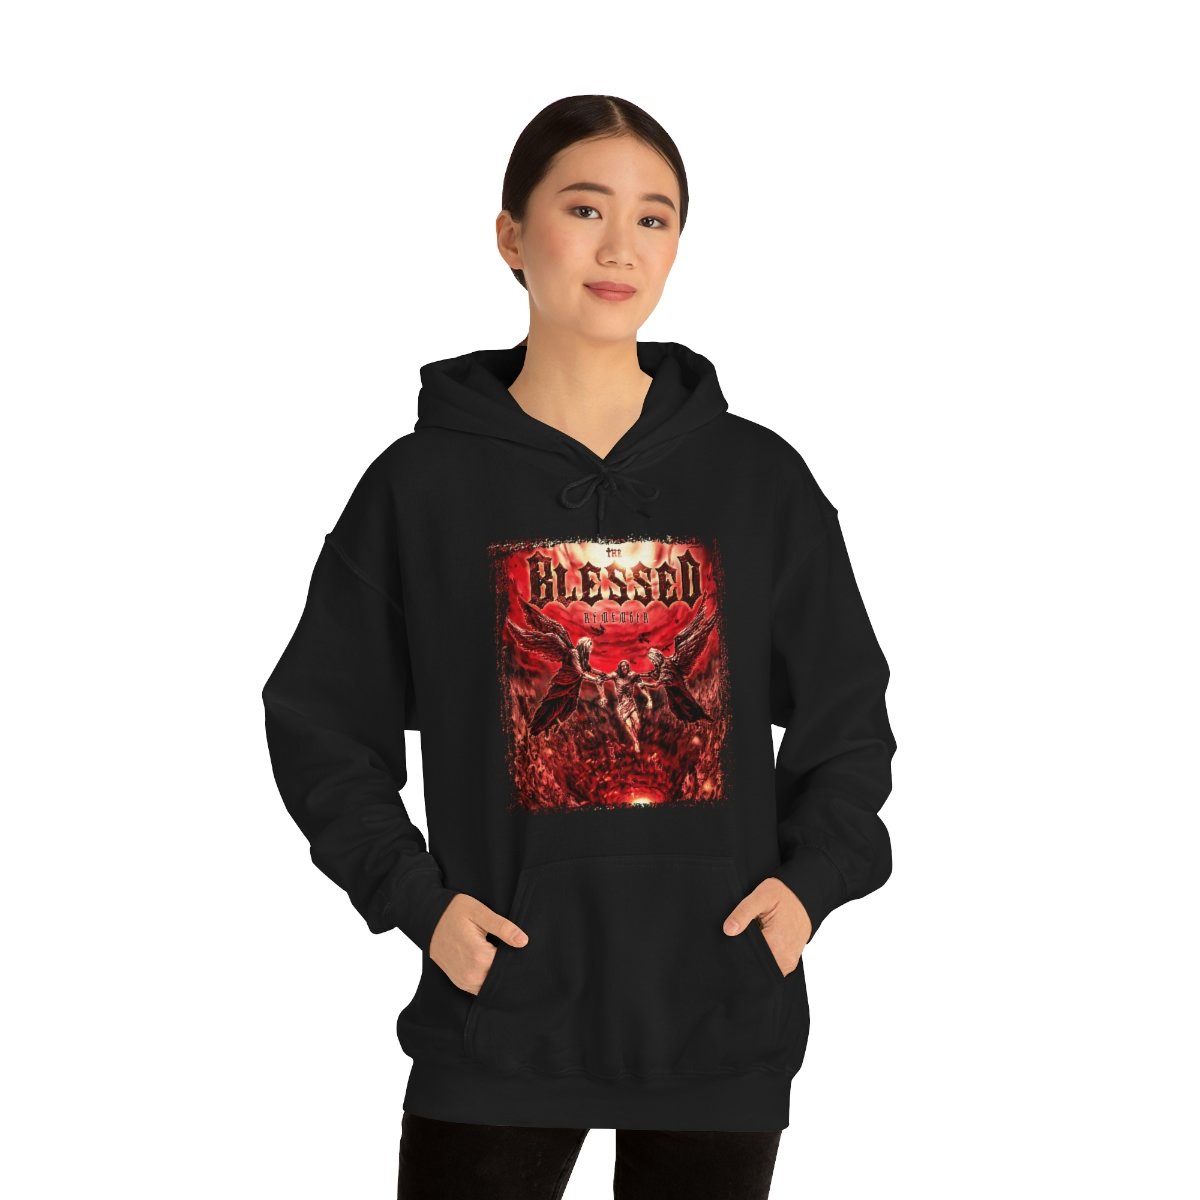 The Blessed – Remember Pullover Hooded Sweatshirt